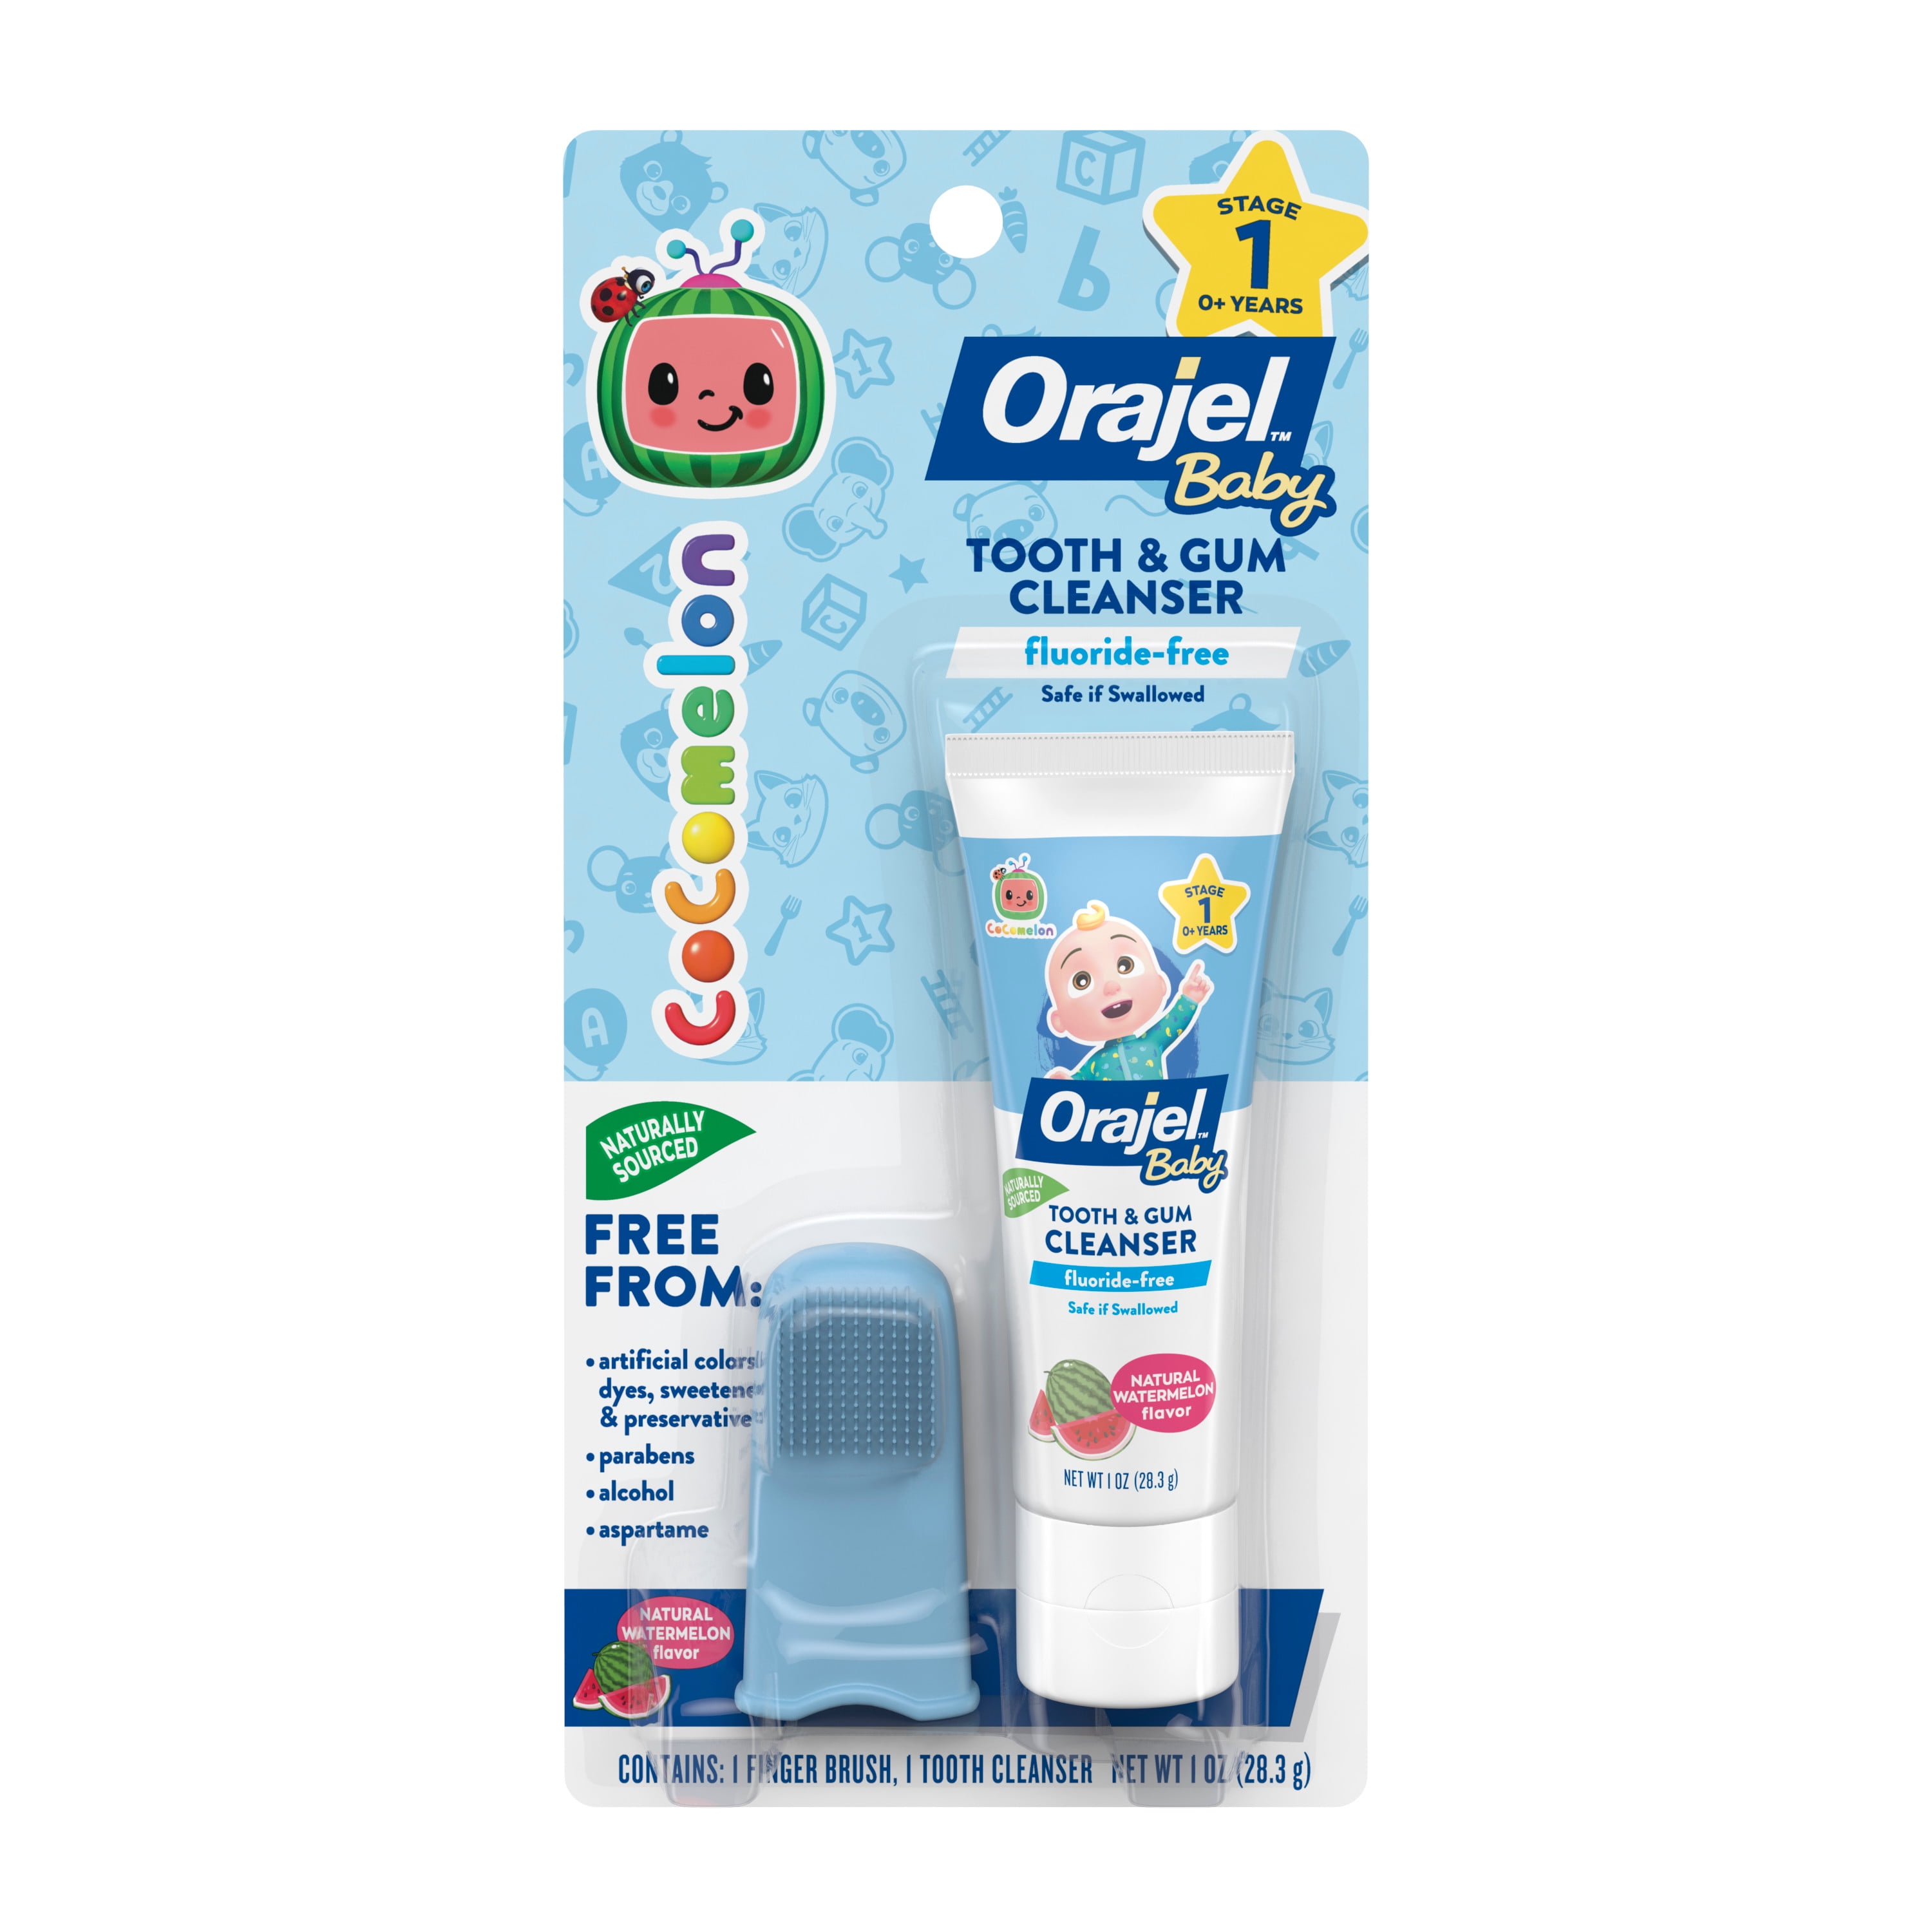 Orajel Baby CoComelon Tooth & Gum Cleanser Fluoride-Free, 1 Finger Brush, 1 Toothpaste 1oz